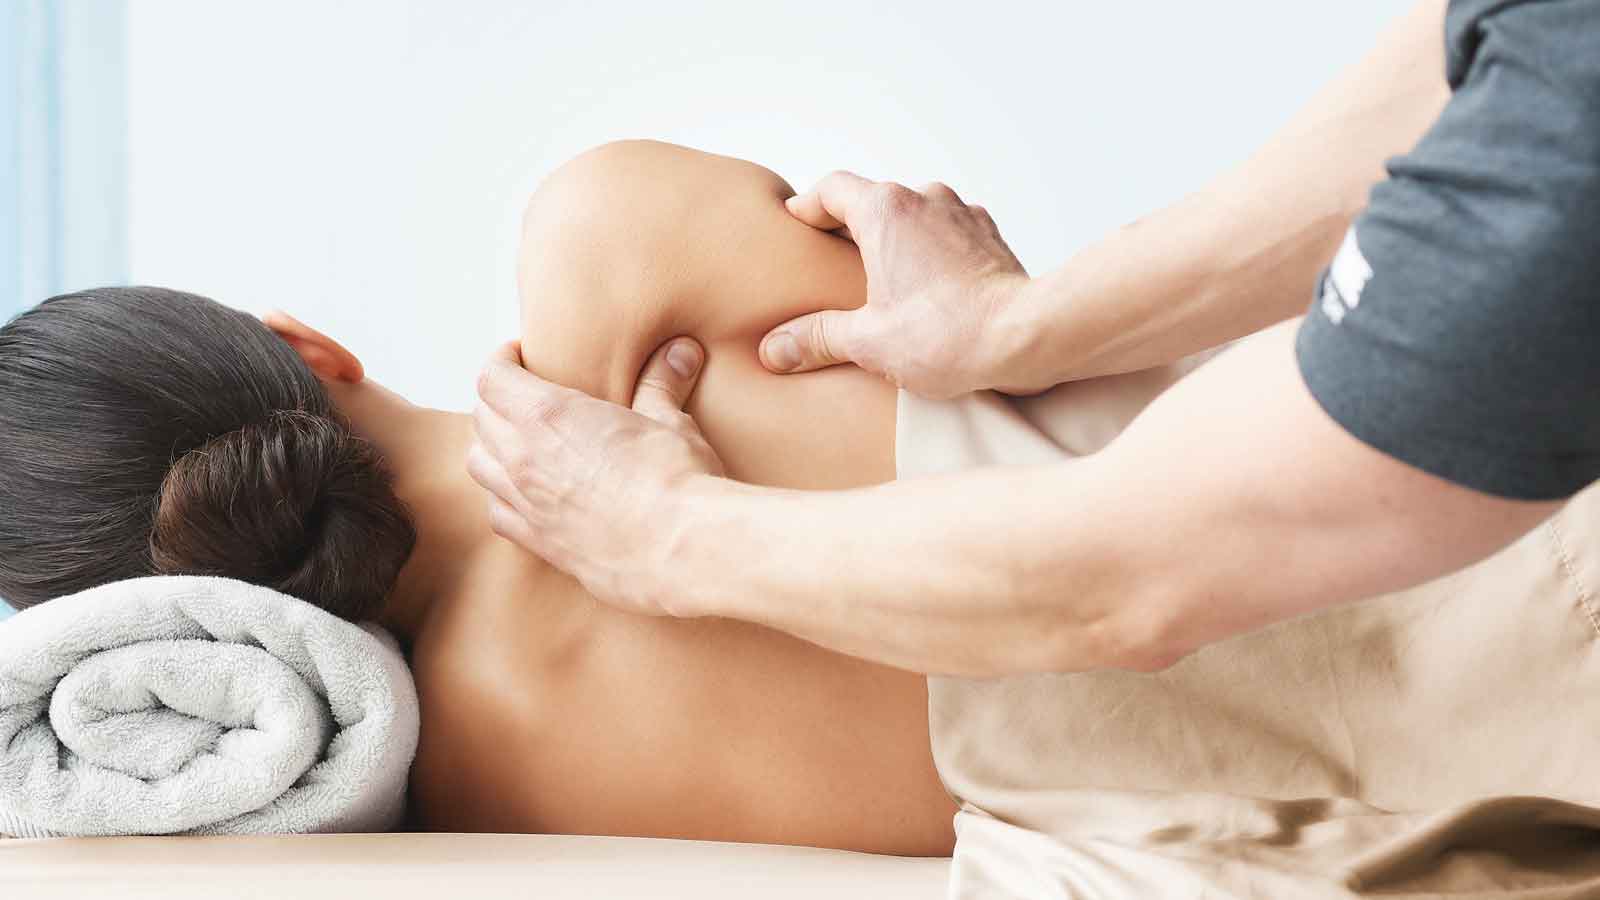 A massues pressing into the shoulders of a women laying on her side on a massage table